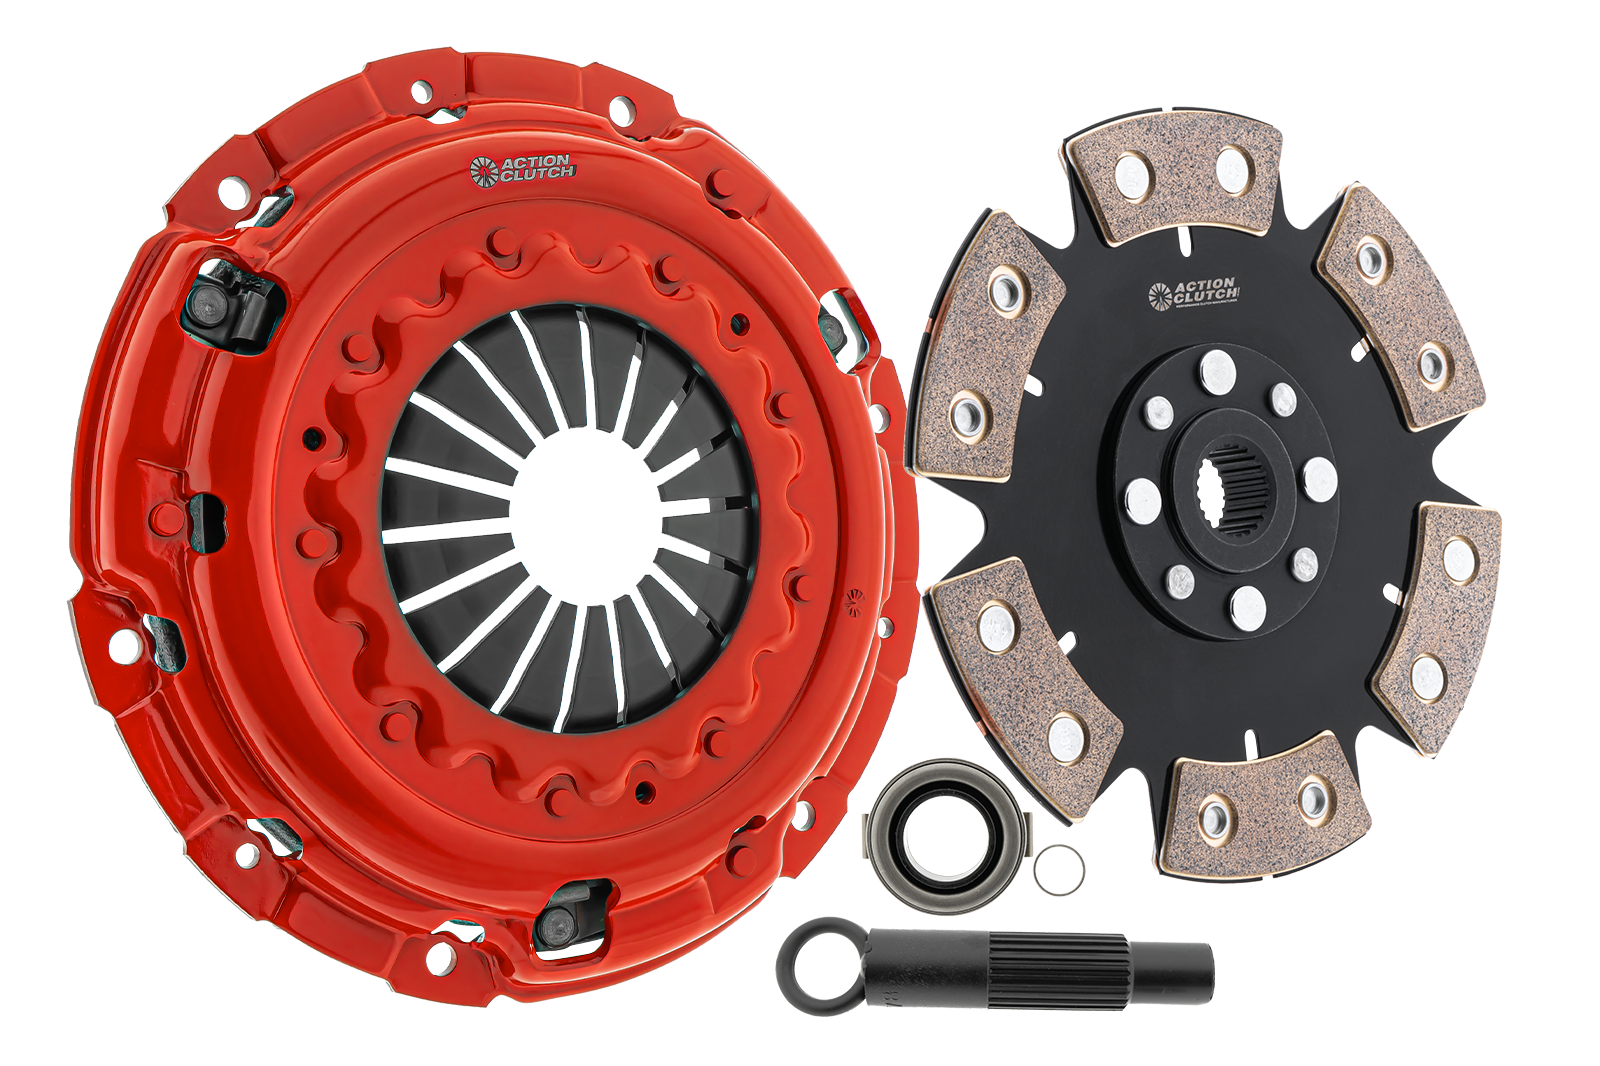 Stage 6 Clutch Kit (2MD) for Nissan 350Z 2007-2008 3.5L (VQ35HR) Without Heavy Duty Concentric Slave Cylinder